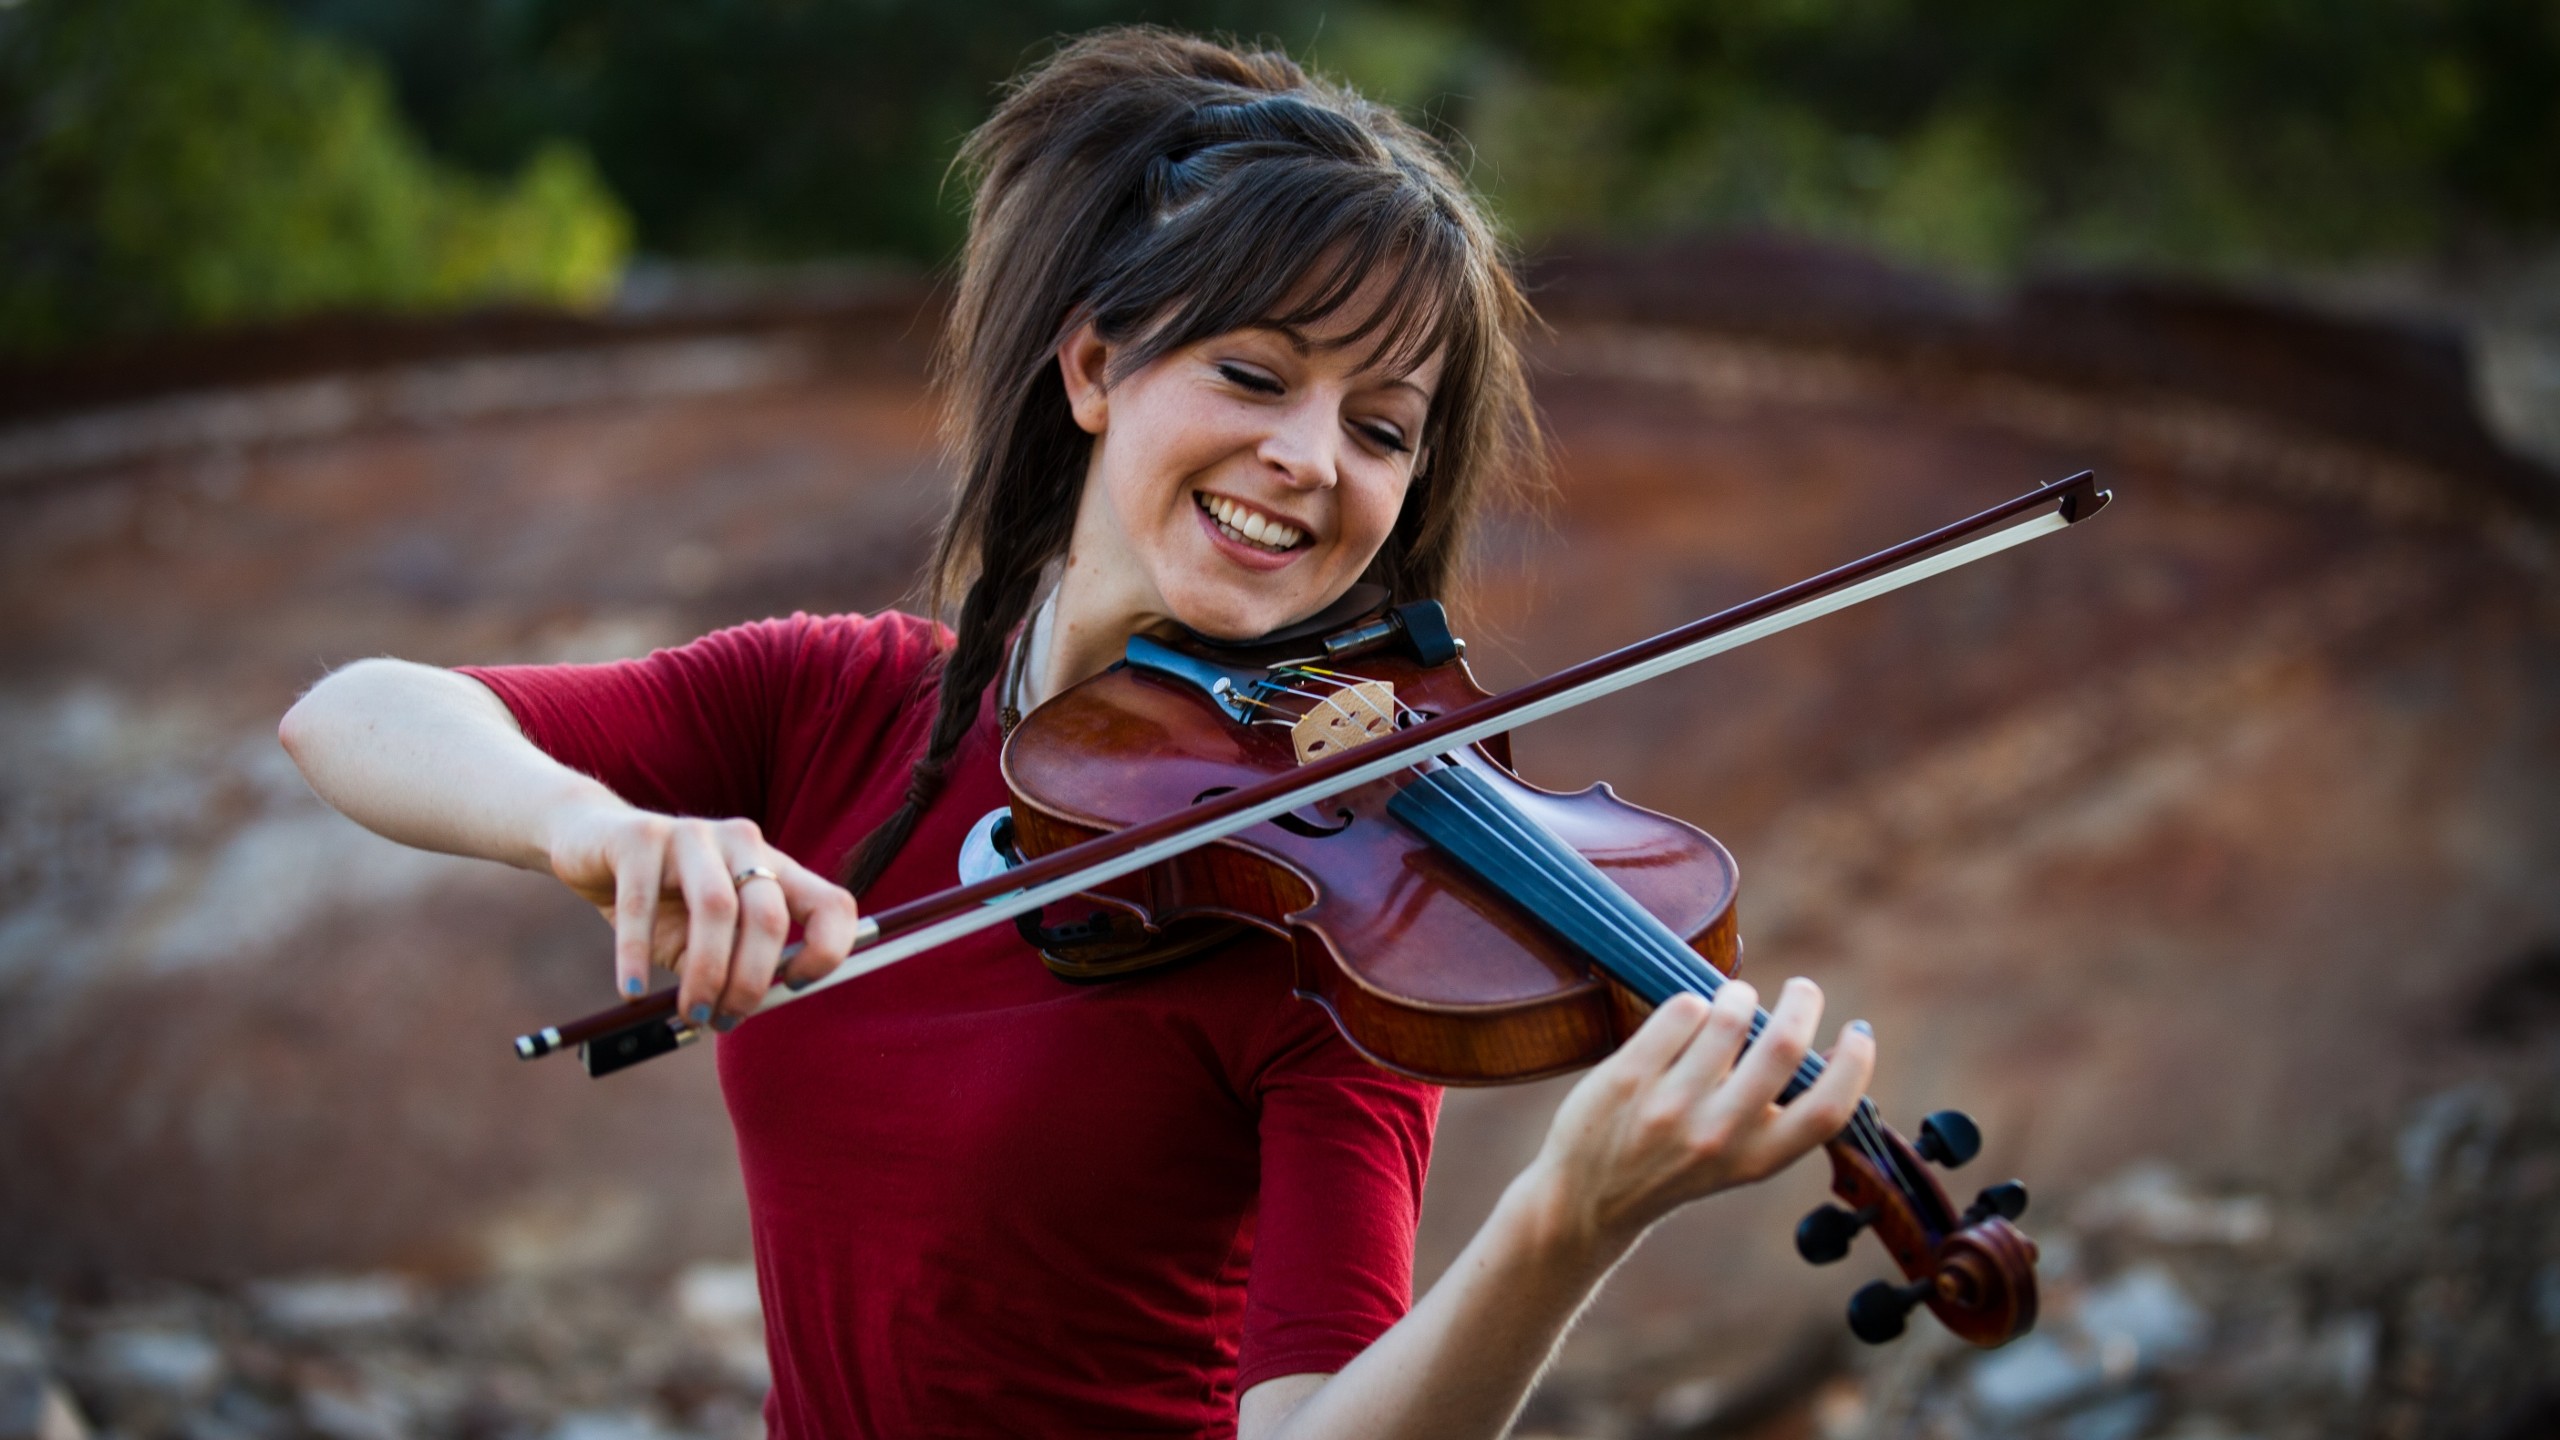 People 2560x1440 Lindsey Stirling women violin musical instrument smiling music women outdoors celebrity musician